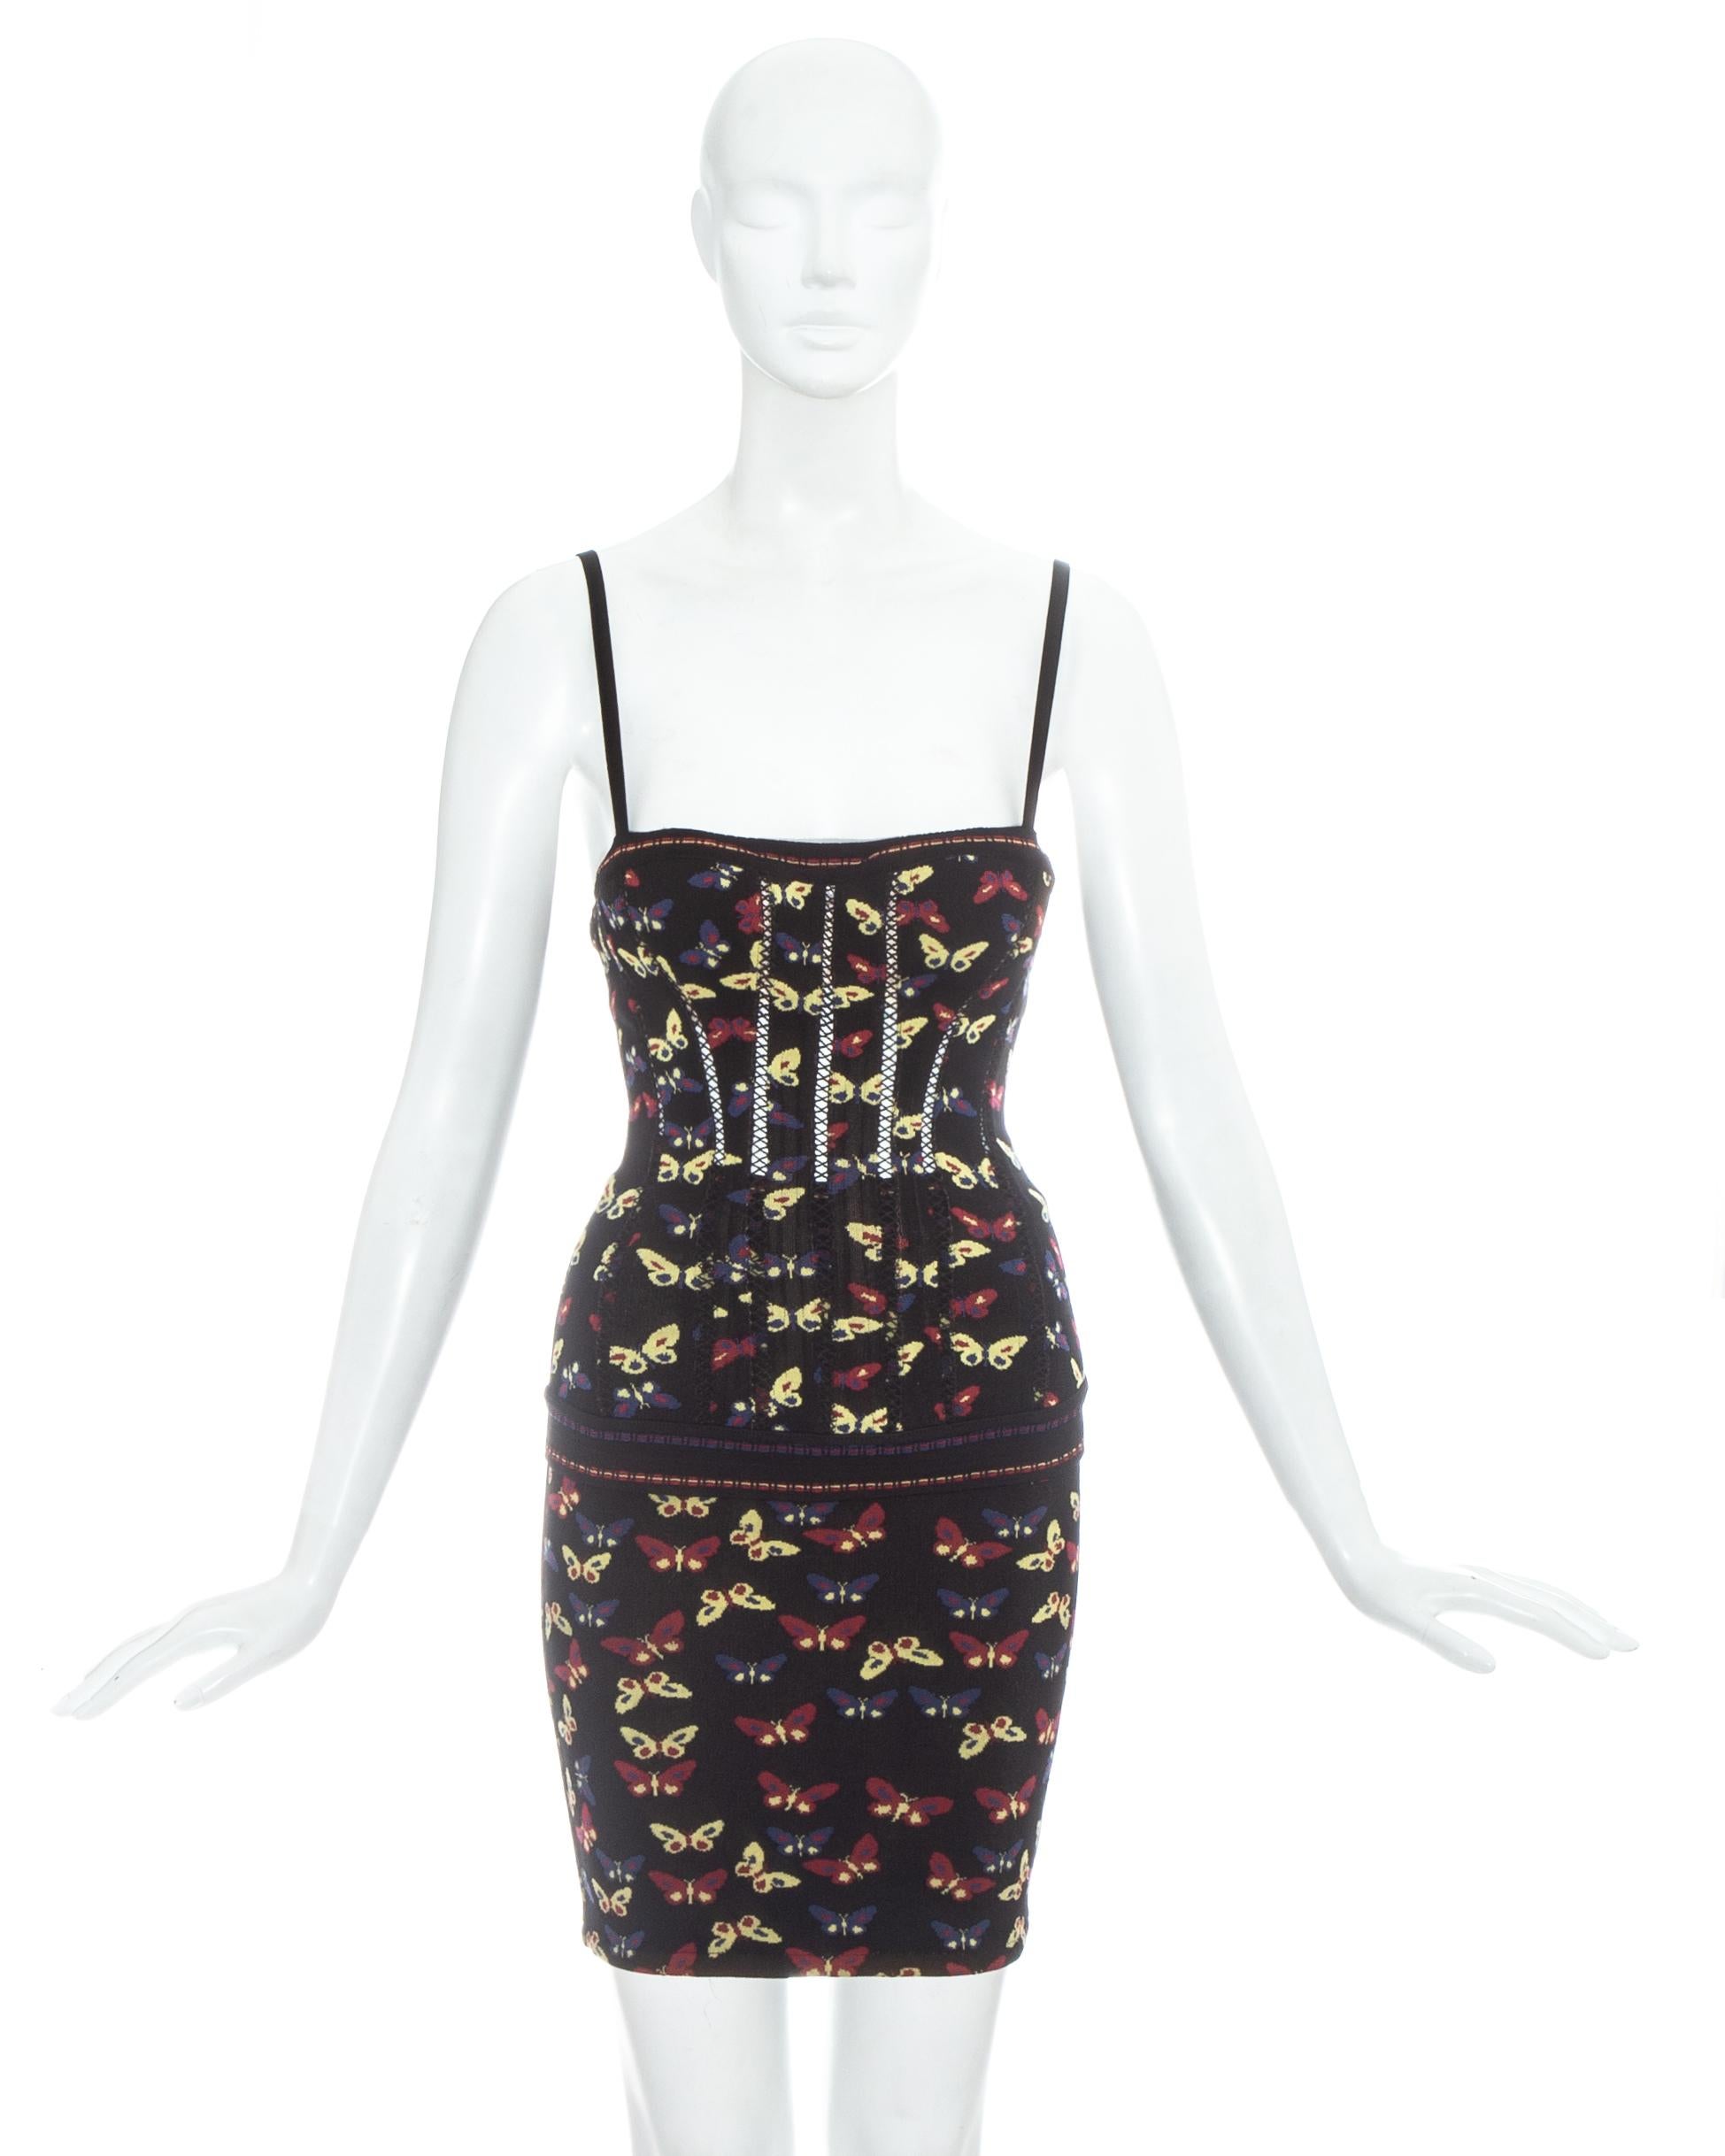 Azzedine Alaia iconic butterfly printed corset and skirt ensemble. Corset with cut outs, zip fastening and built in padded bra; paired with fitted pencil skirt.

Fall-Winter 1991
